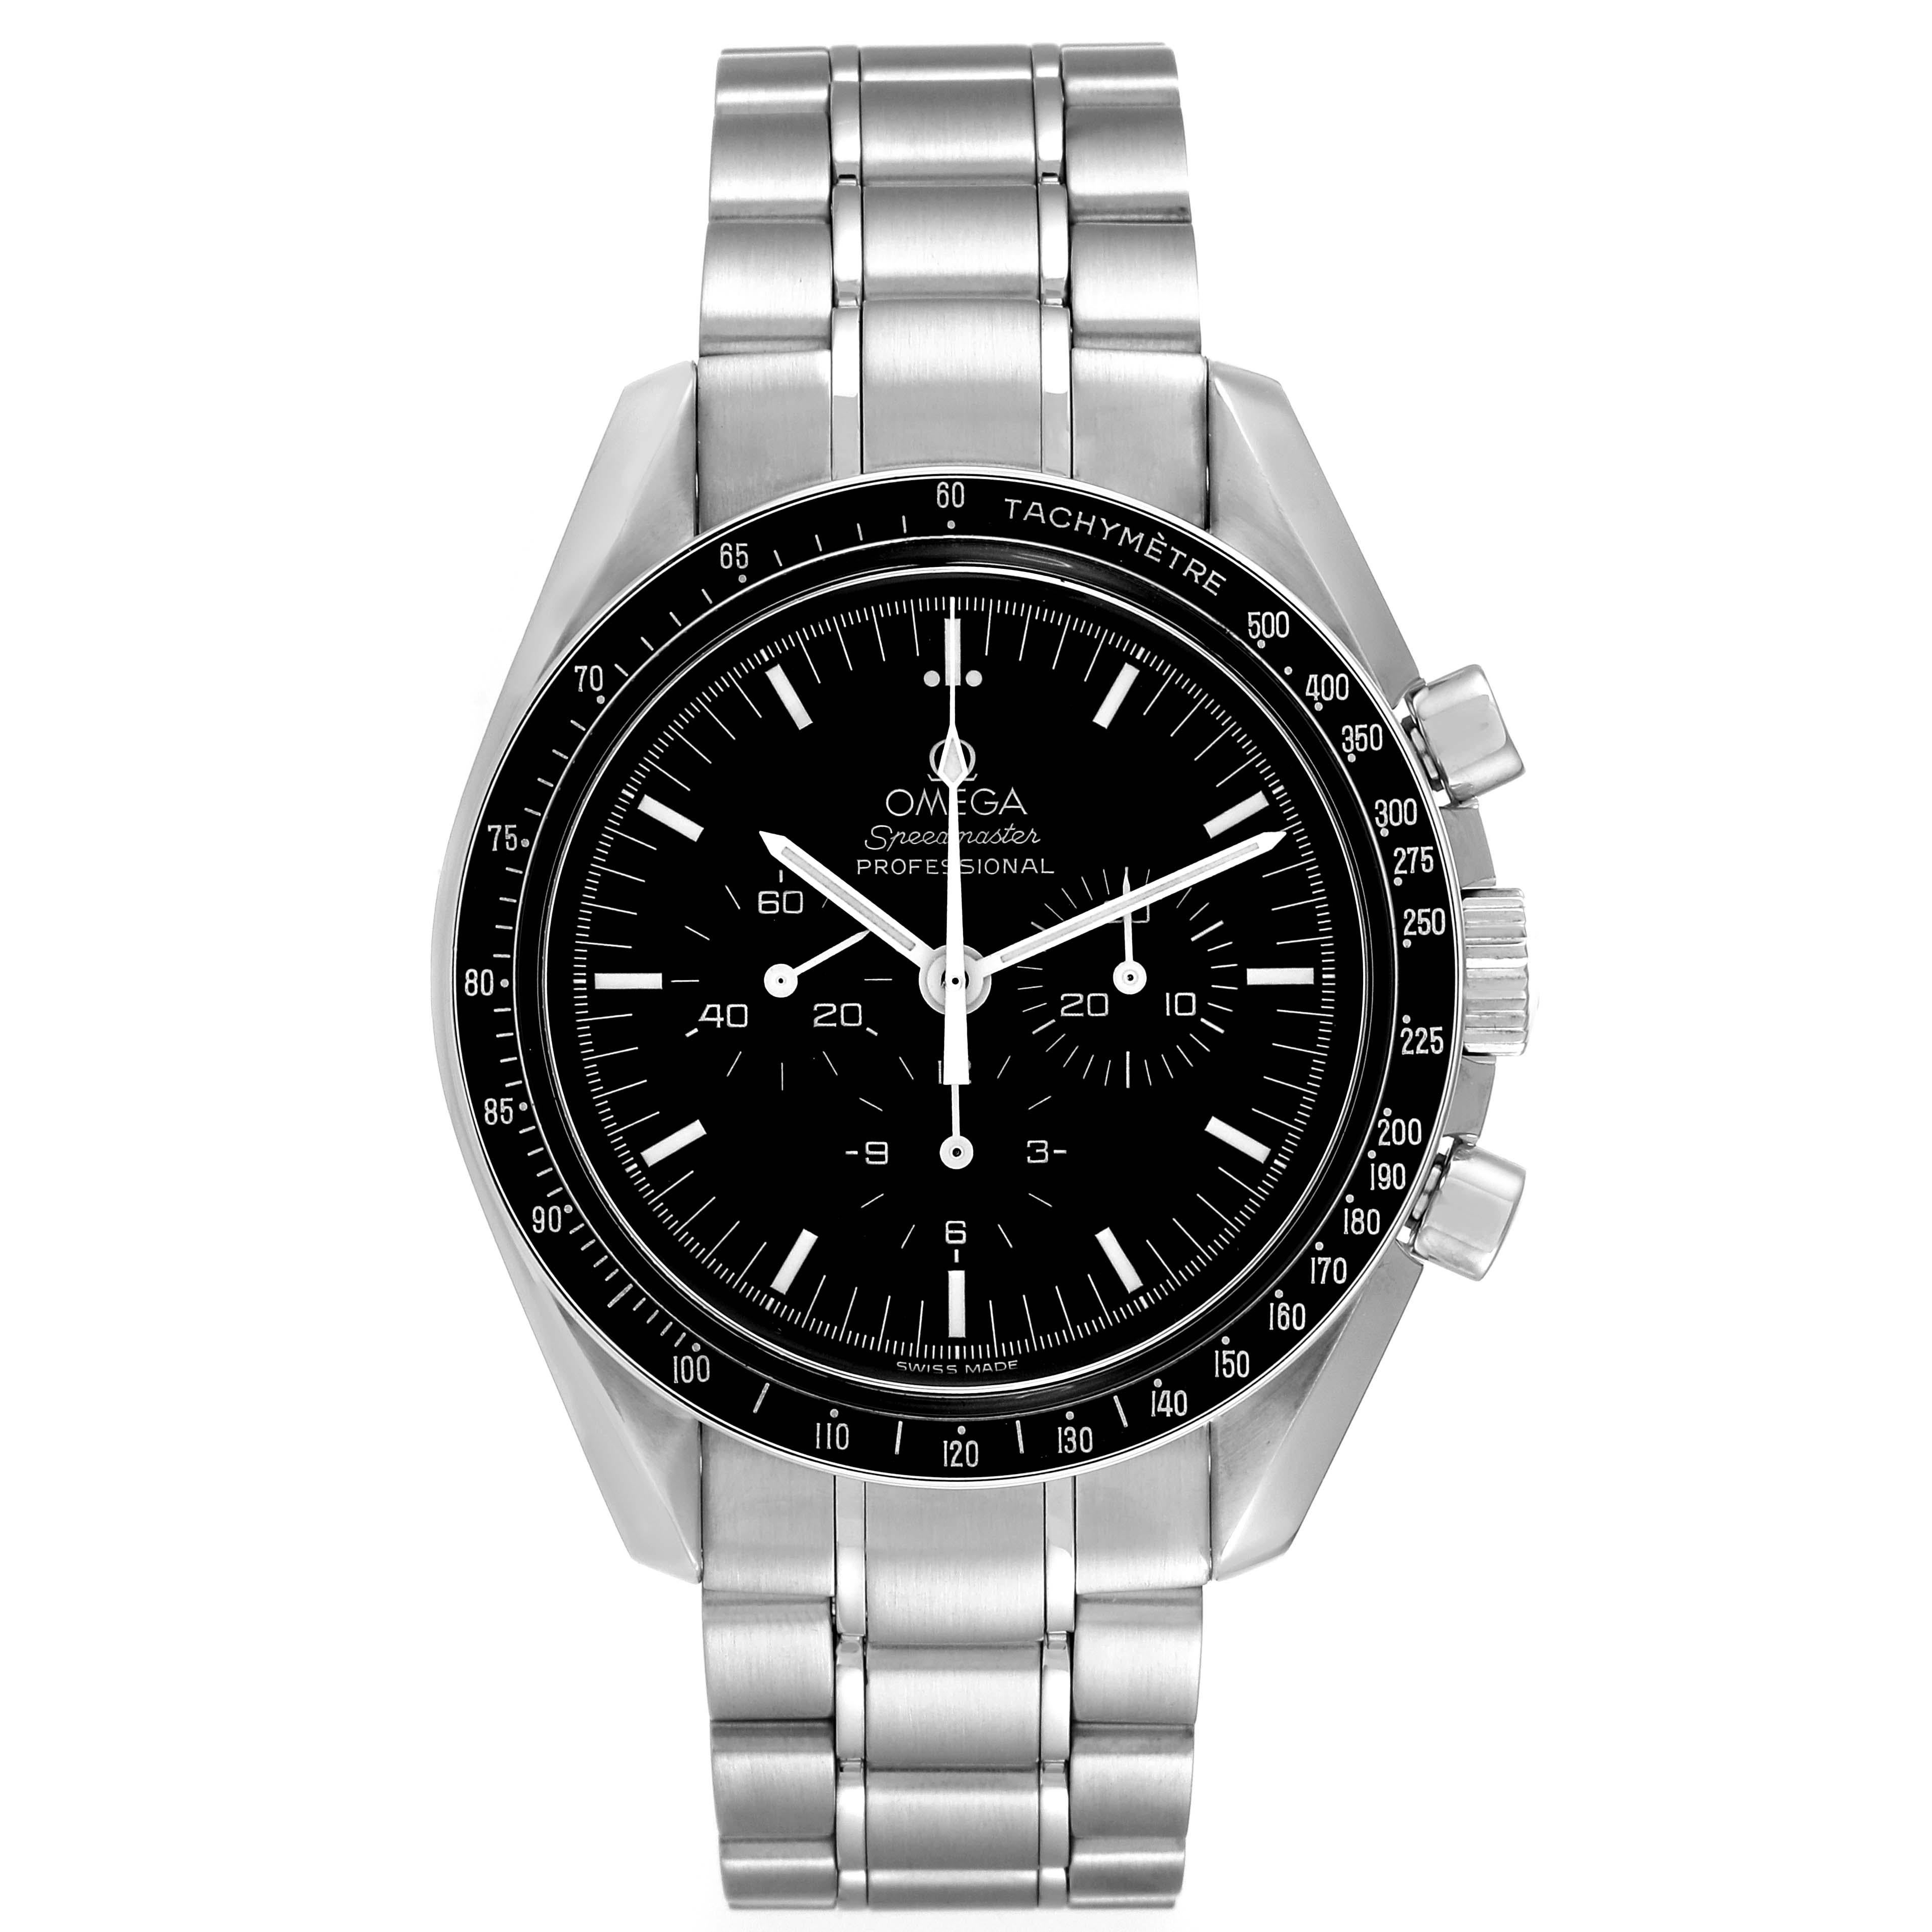 Omega Speedmaster MoonWatch Chronograph Black Dial Steel Mens Watch 3570.50.00. Manual winding chronograph movement. Stainless steel round case 42.0 mm in diameter. Stainless steel bezel with tachymetre function. Hesalite acrylic crystal. Black dial